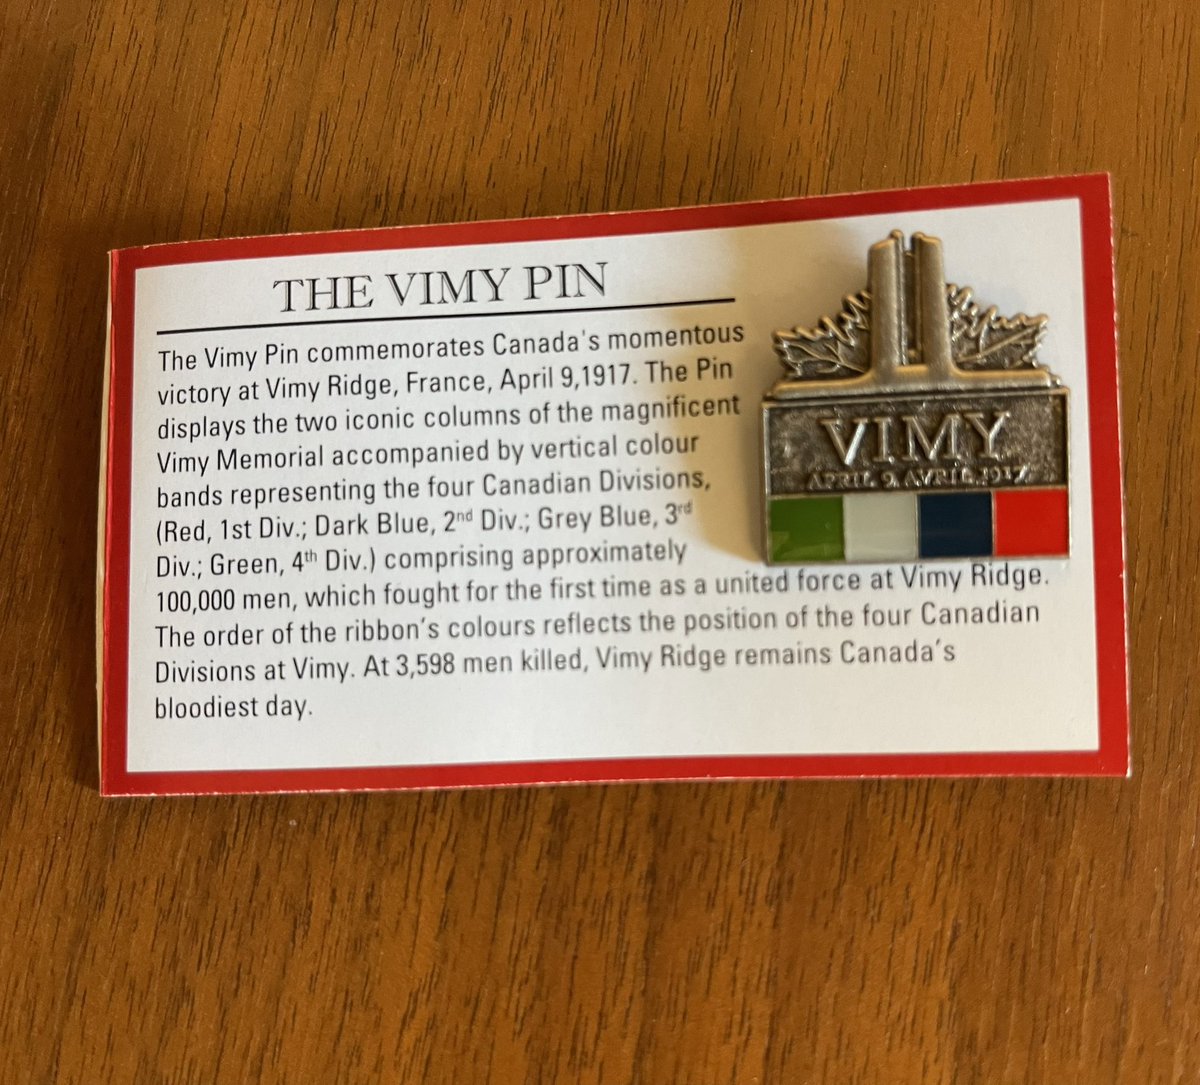 Wearing my Vimy pin today — and thinking about all of the brave Canadians who fought at Vimy Ridge 107 years ago. Lest we forget. #VimyRidgeDay